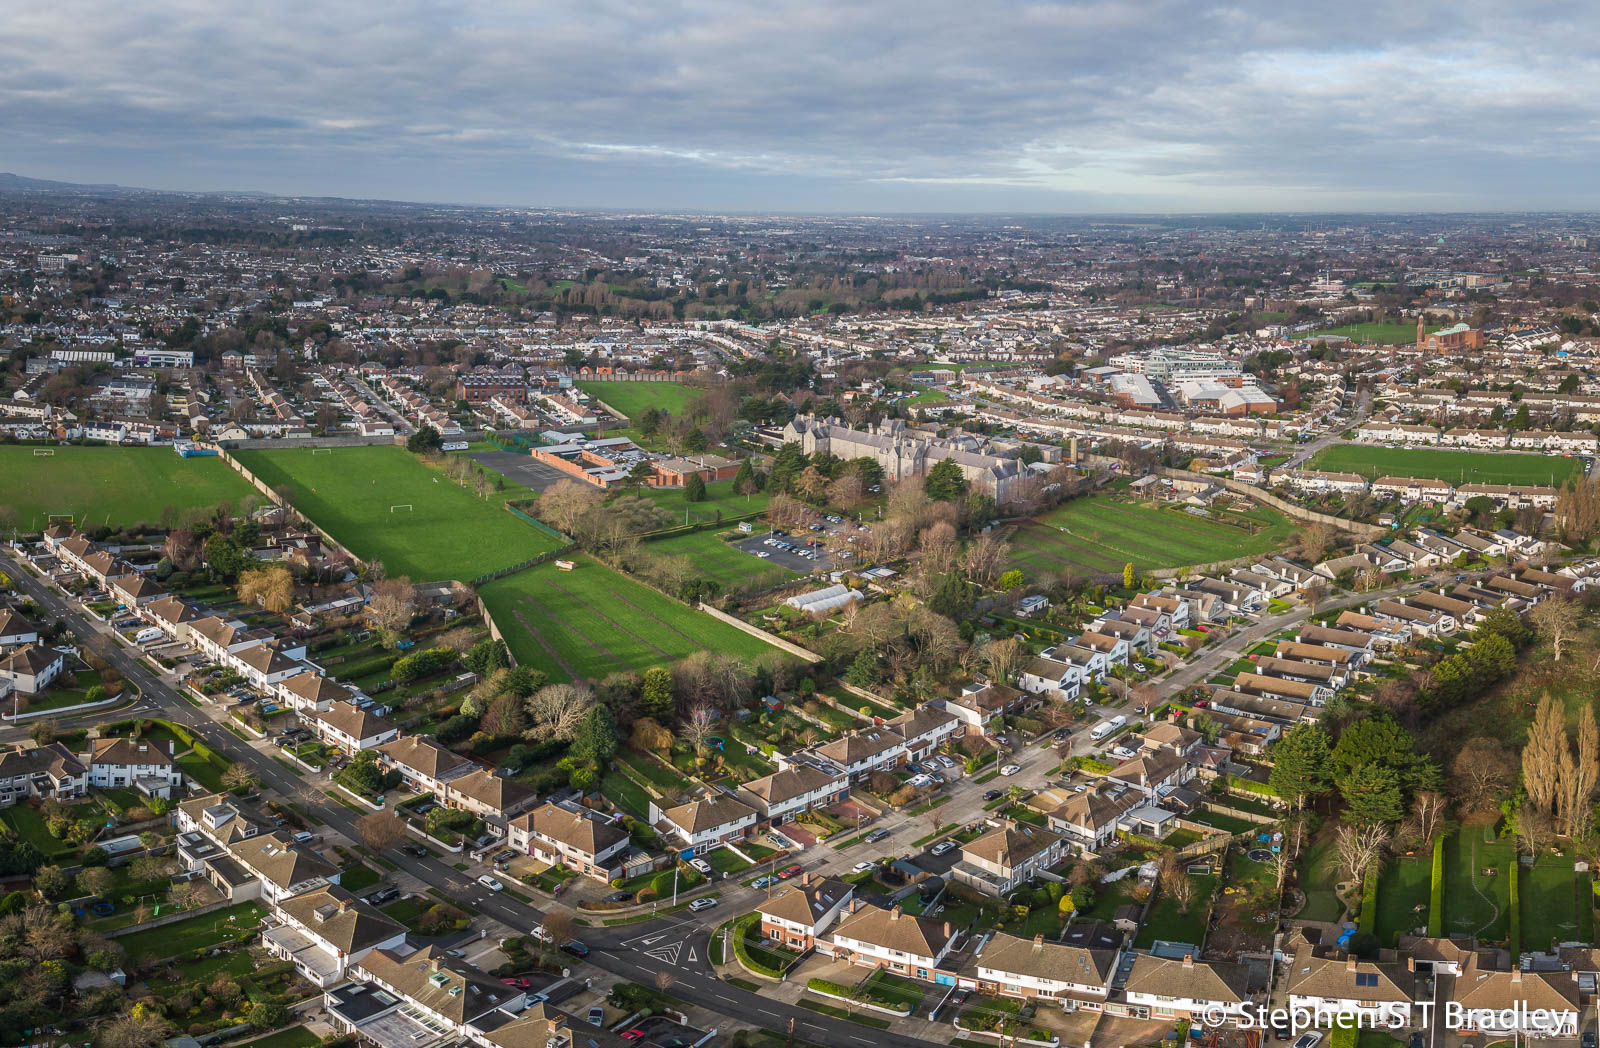 Aerial drone photography and video production services Dublin and Ireland portfolio - commercial aerial photography of the Dundrum suburb of Dublin Ireland. Photo